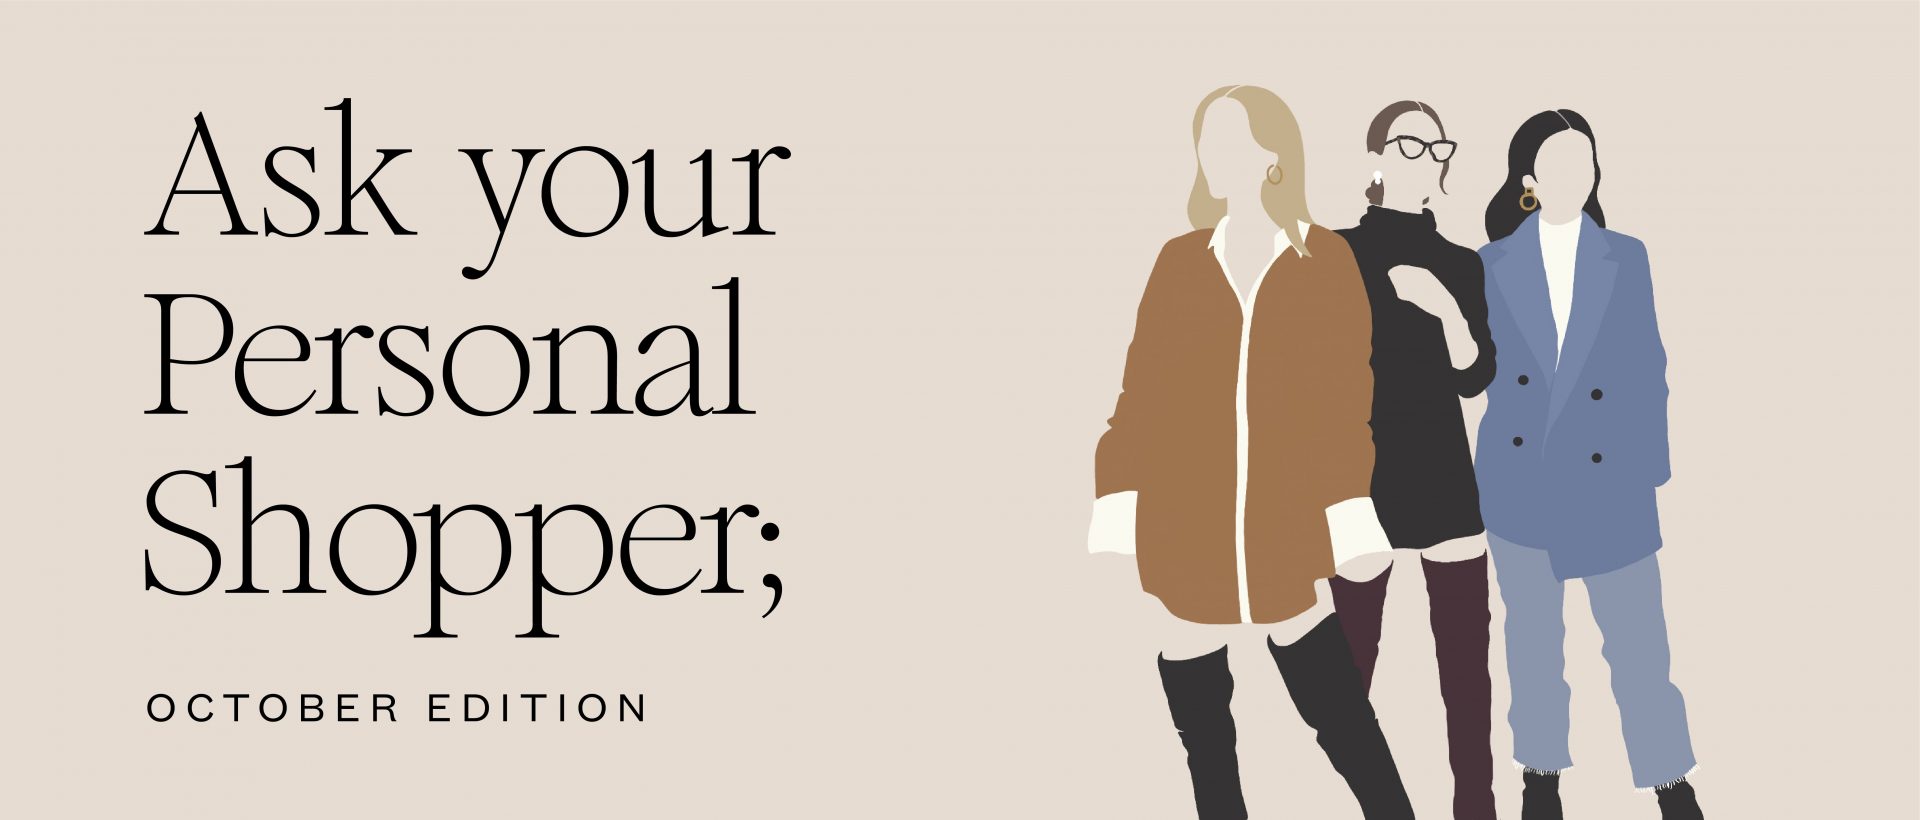 Ask to personal shopper october